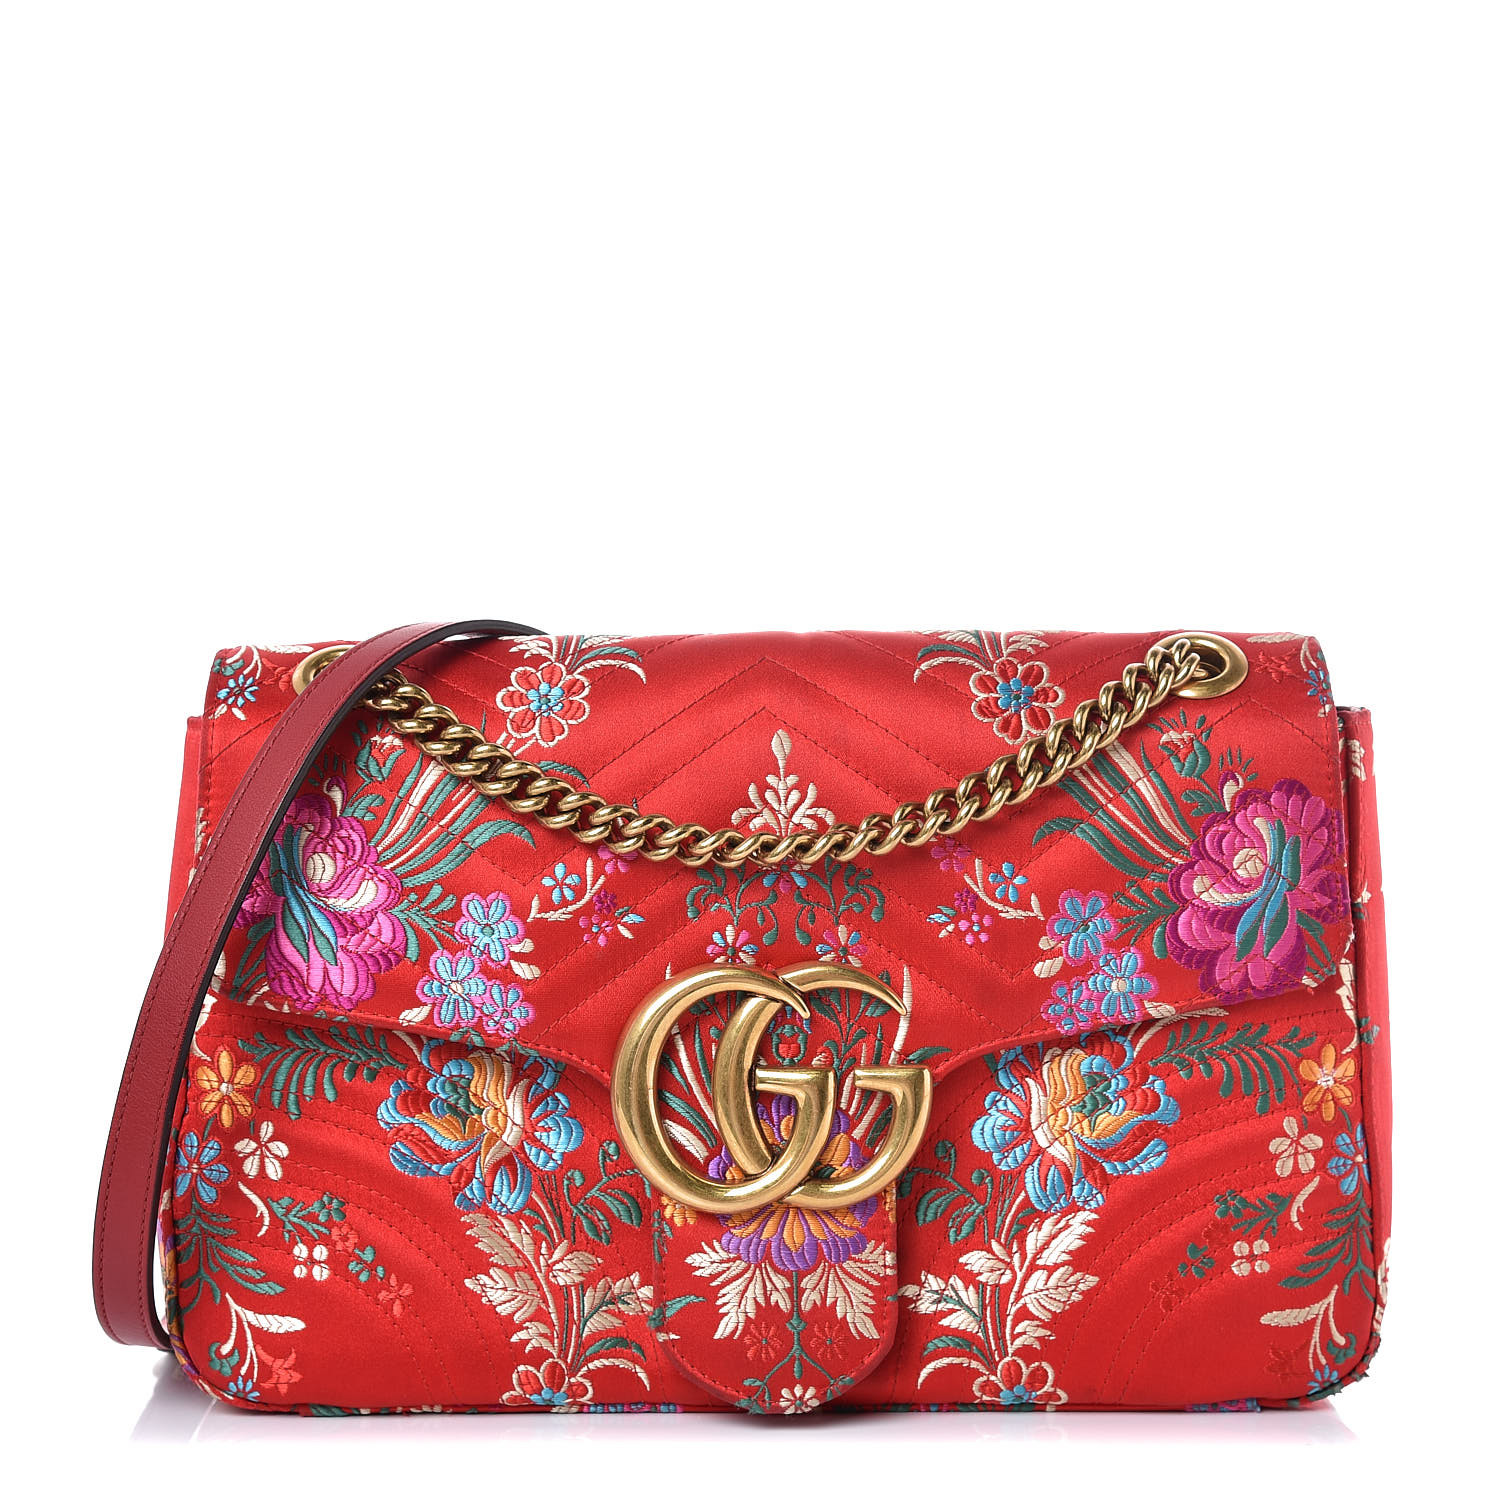 red floral gucci bag